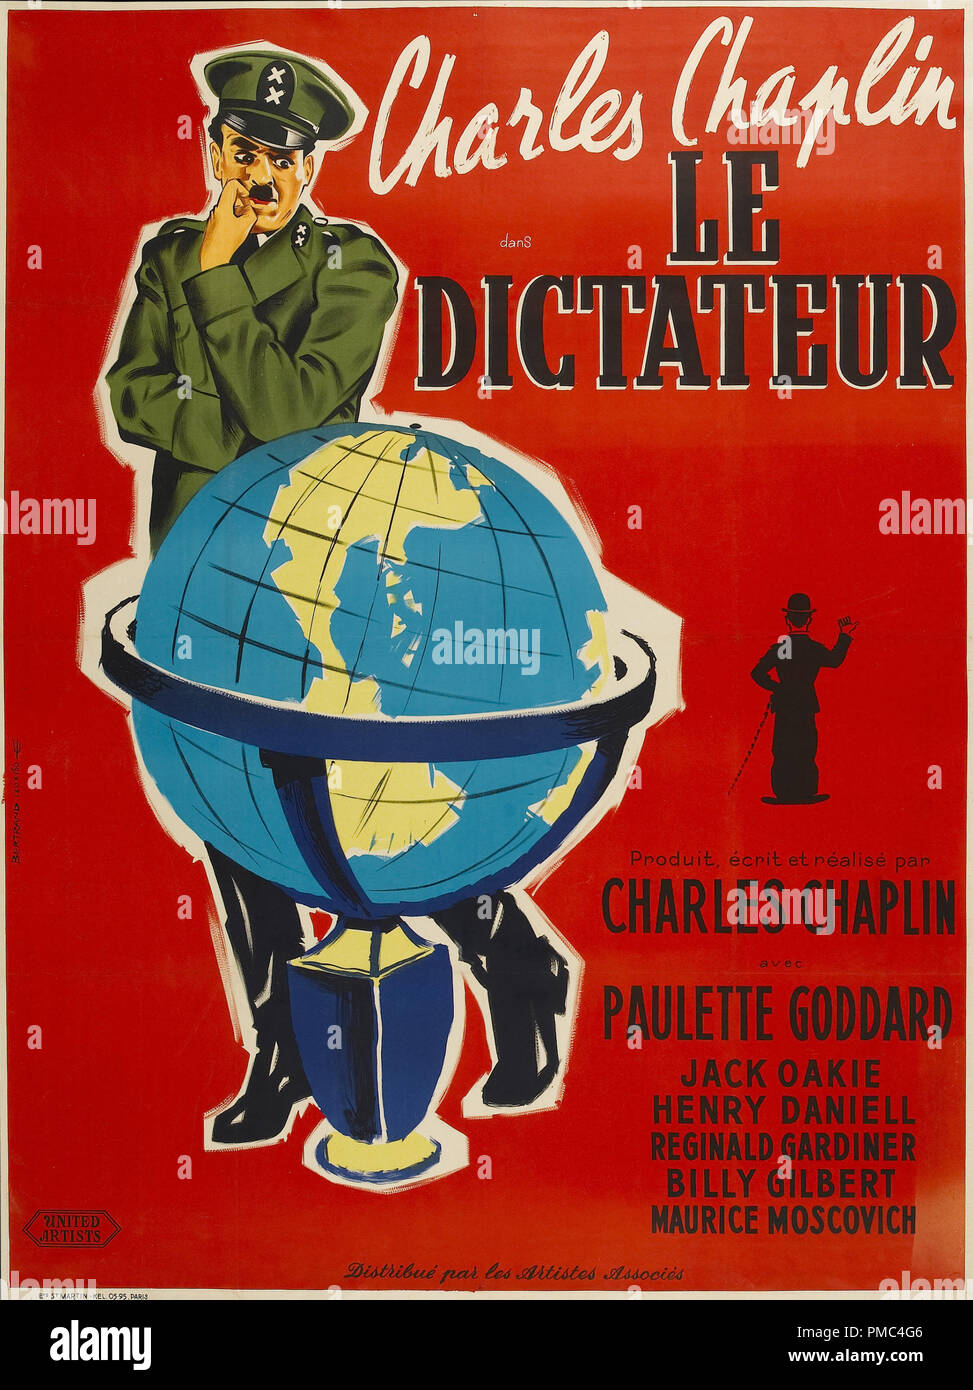 Charles Chaplin,  The Great Dictator, 1940 (United Artists, Re-release 1950s). French Poster  File Reference # 33595 752THA Stock Photo